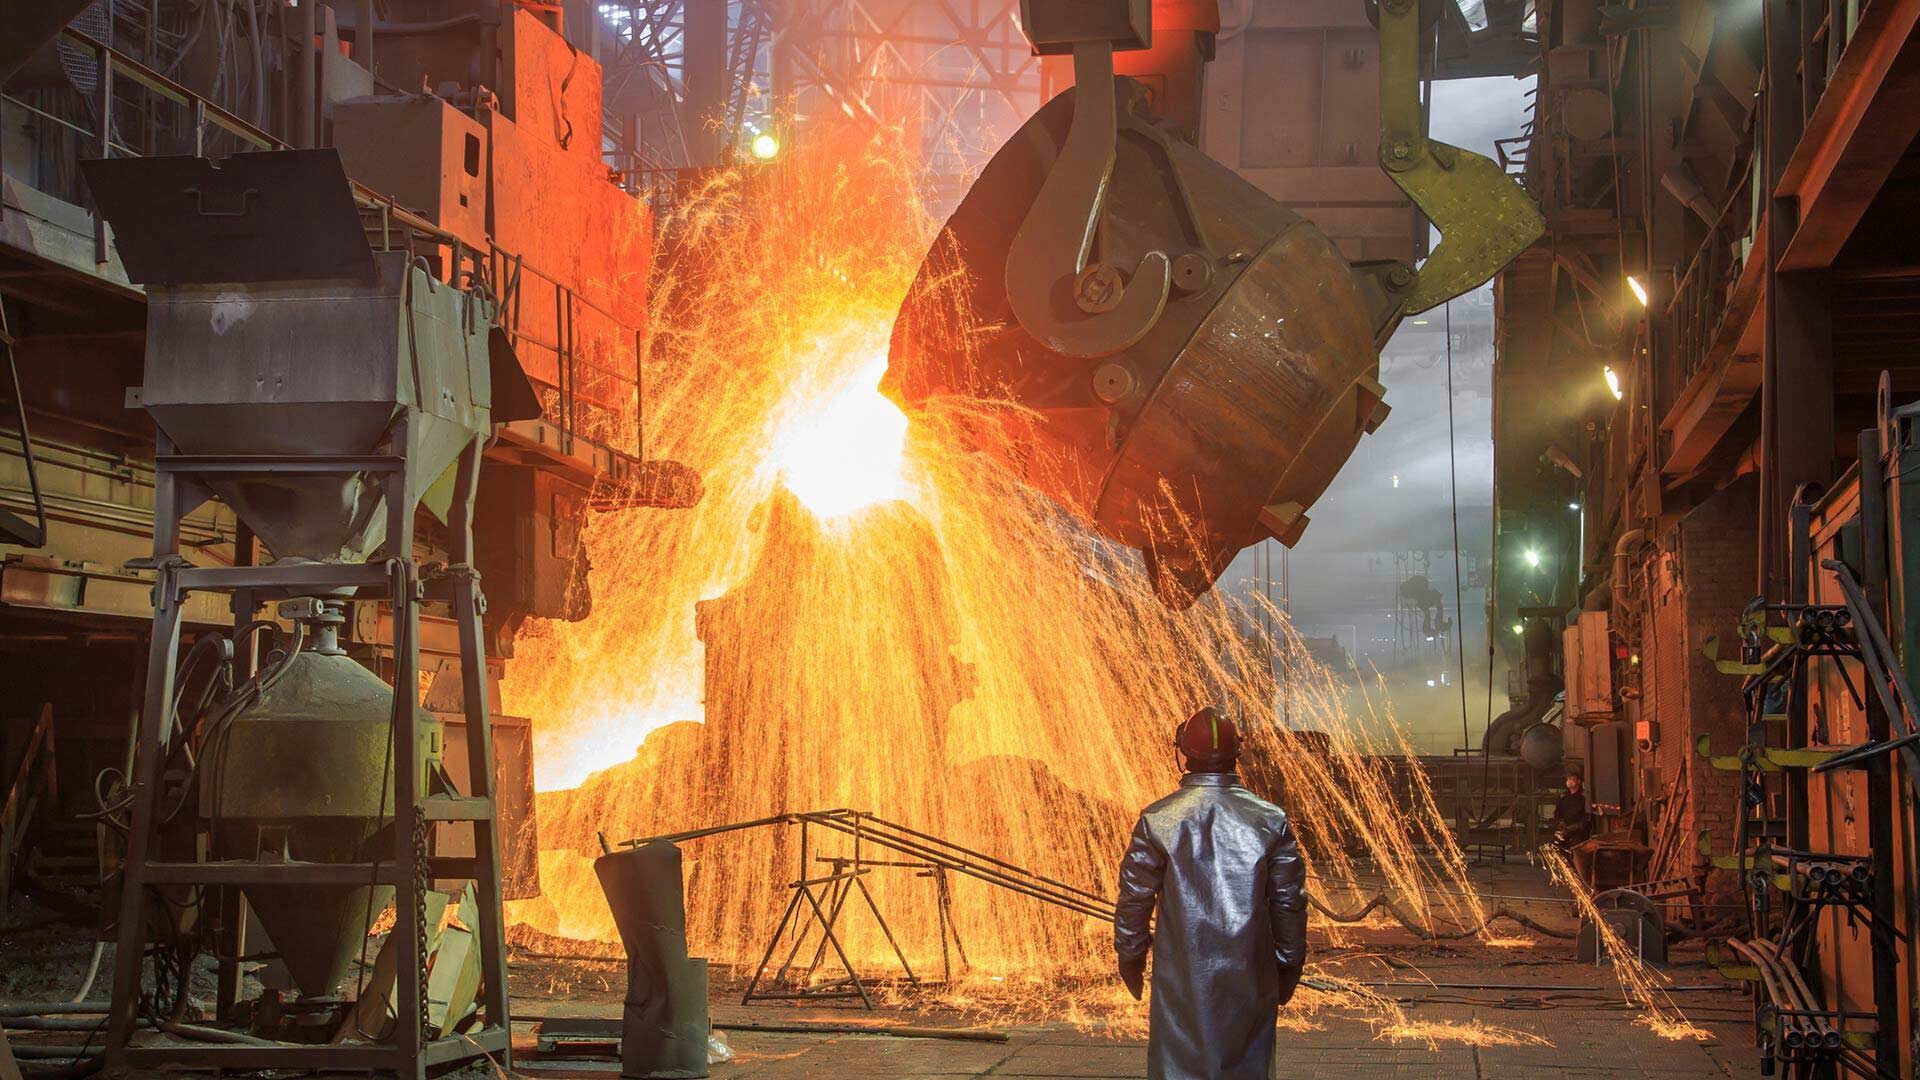 fiery molten metals used in the production of steel